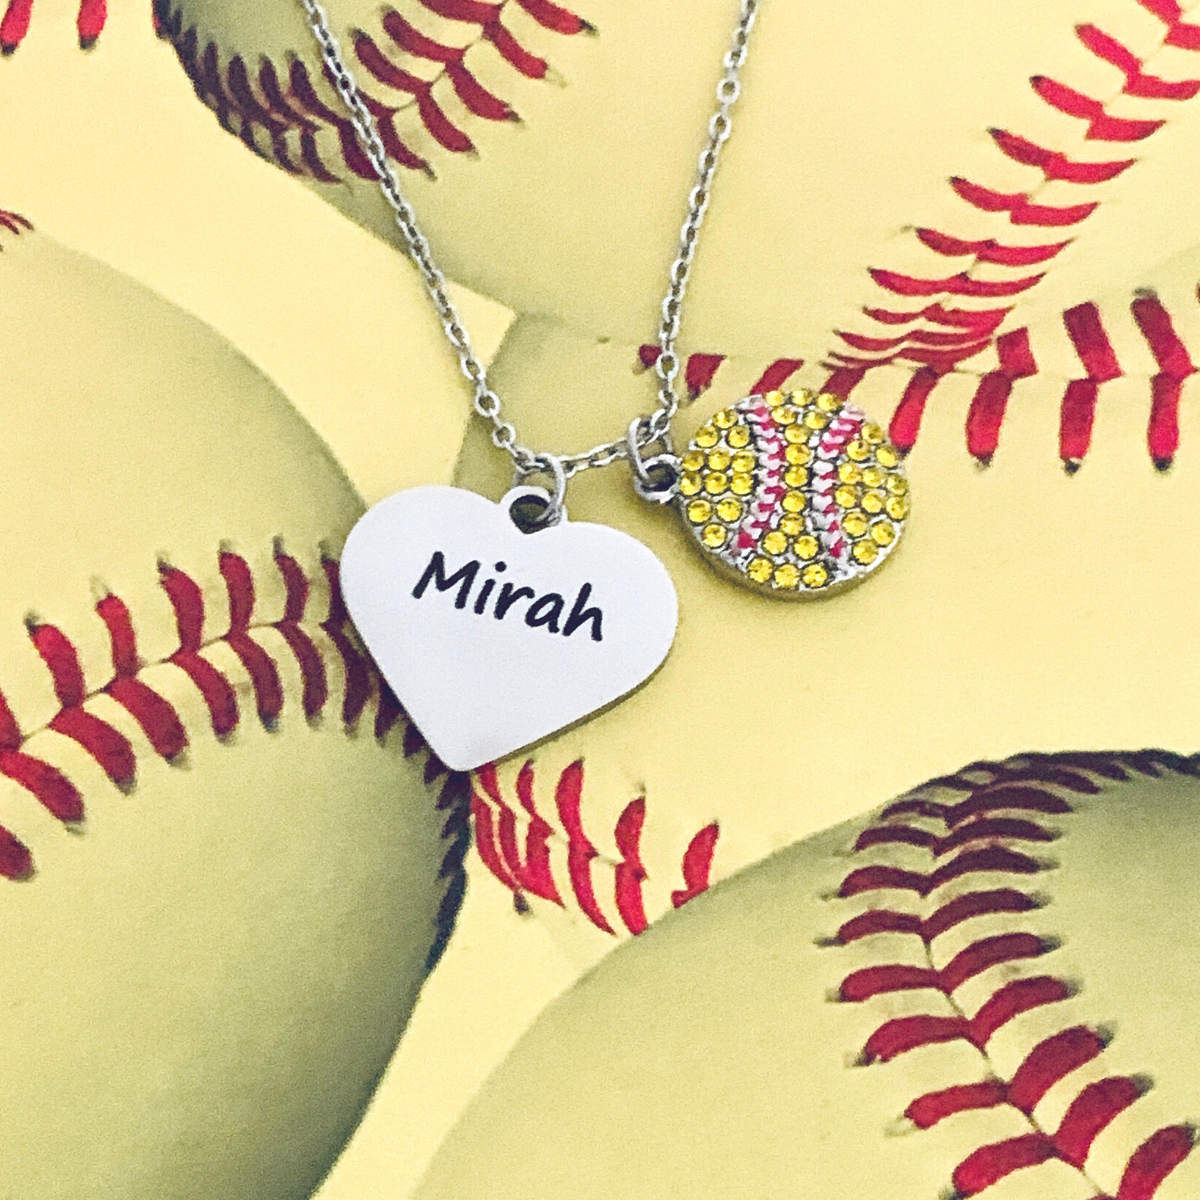 Personalized Engraved Softball Heart Necklace